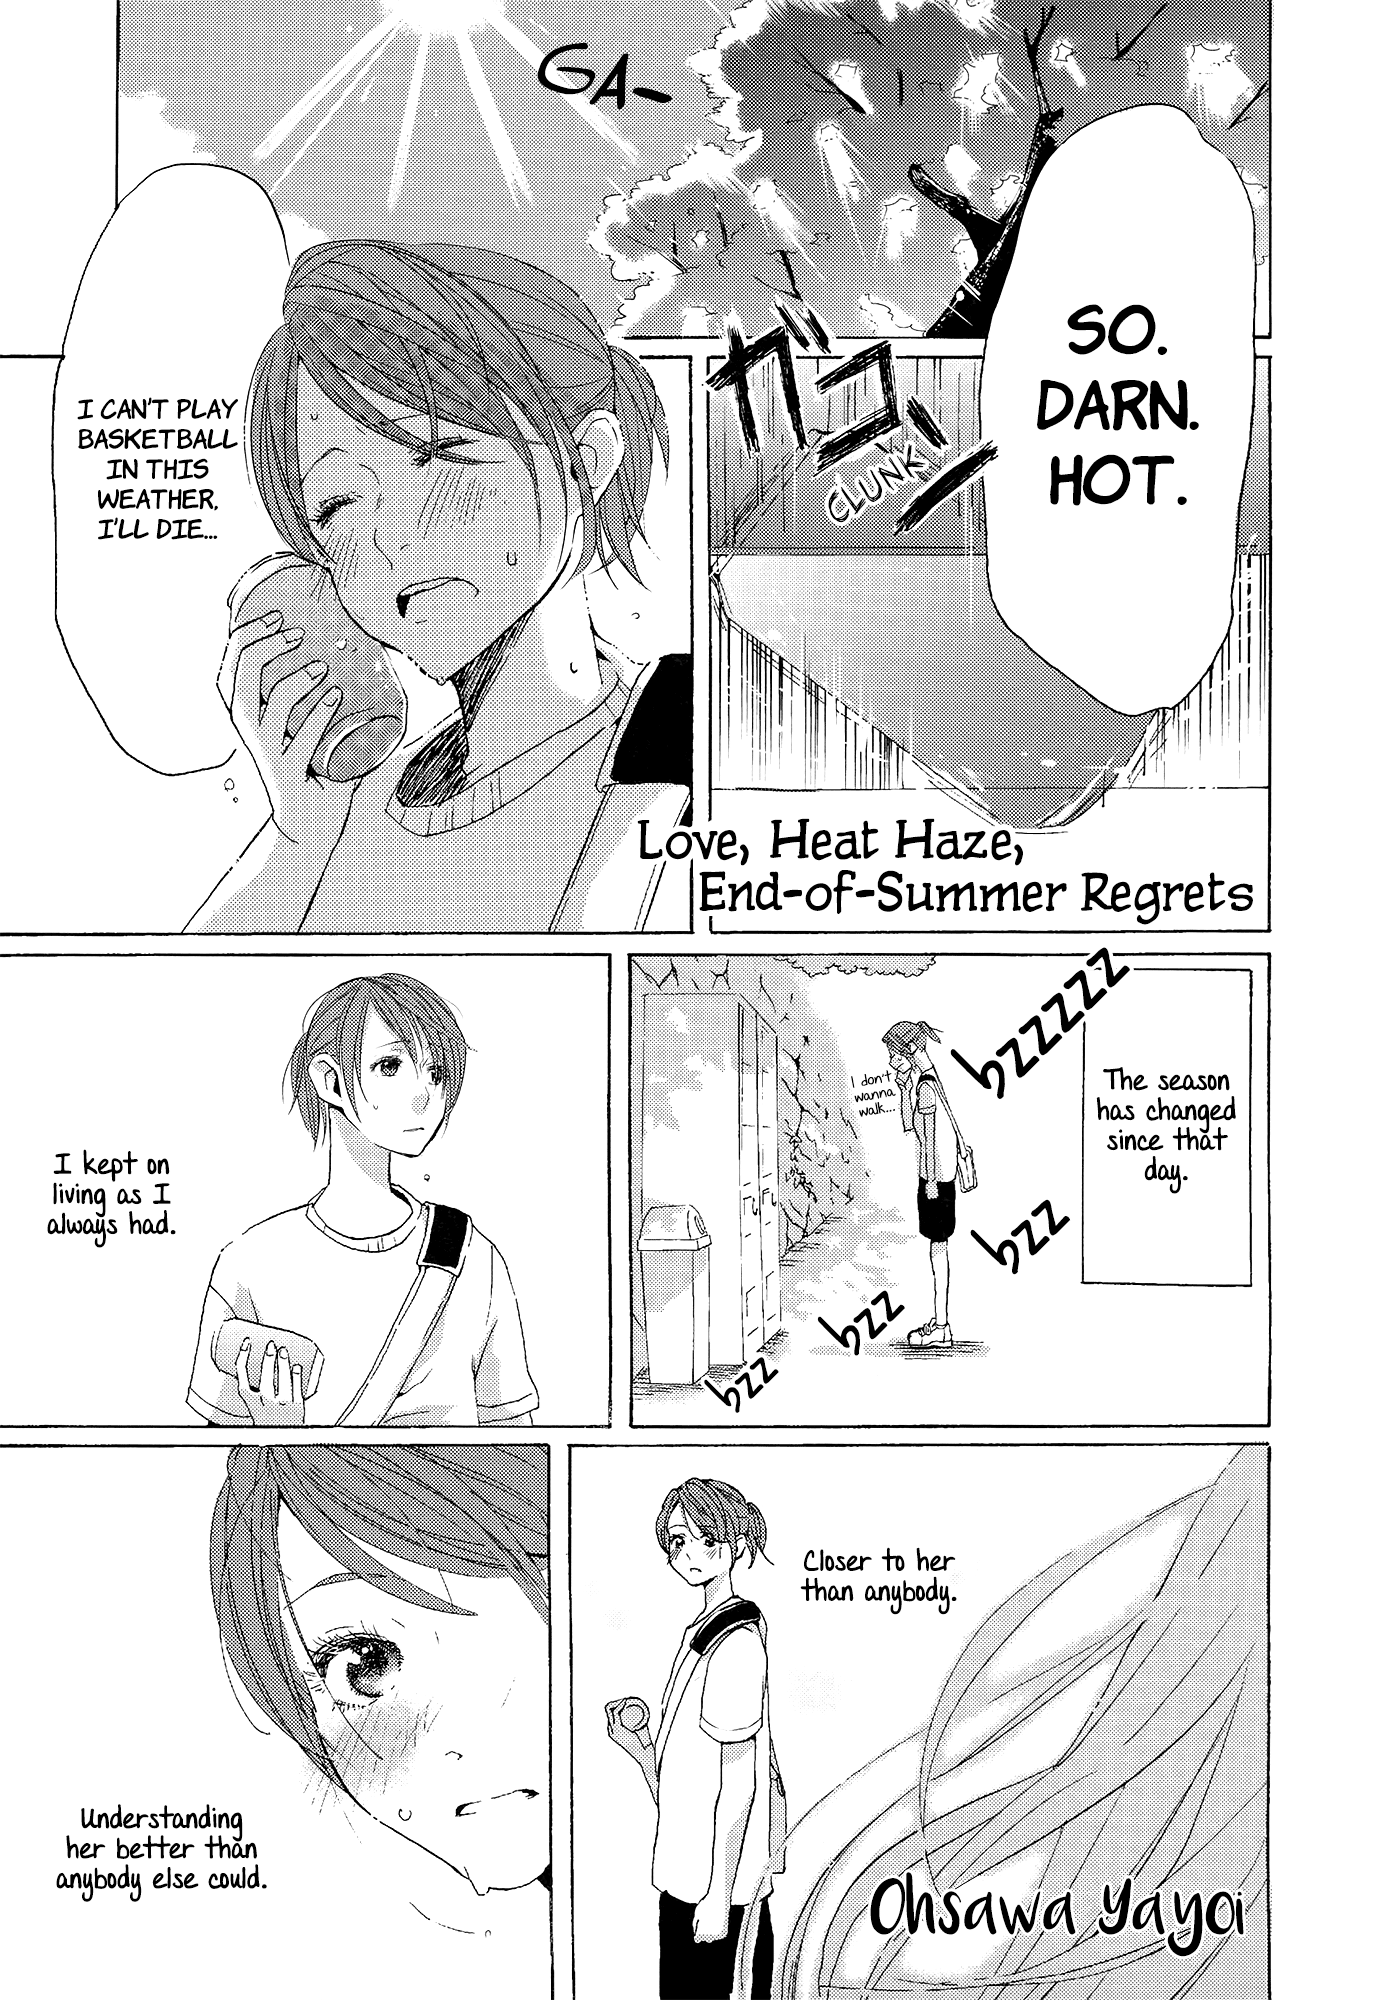 Sayuri Hime Vol.7 Chapter 2: Love, Heat Haze, End-Of-Summer Regrets - Picture 1